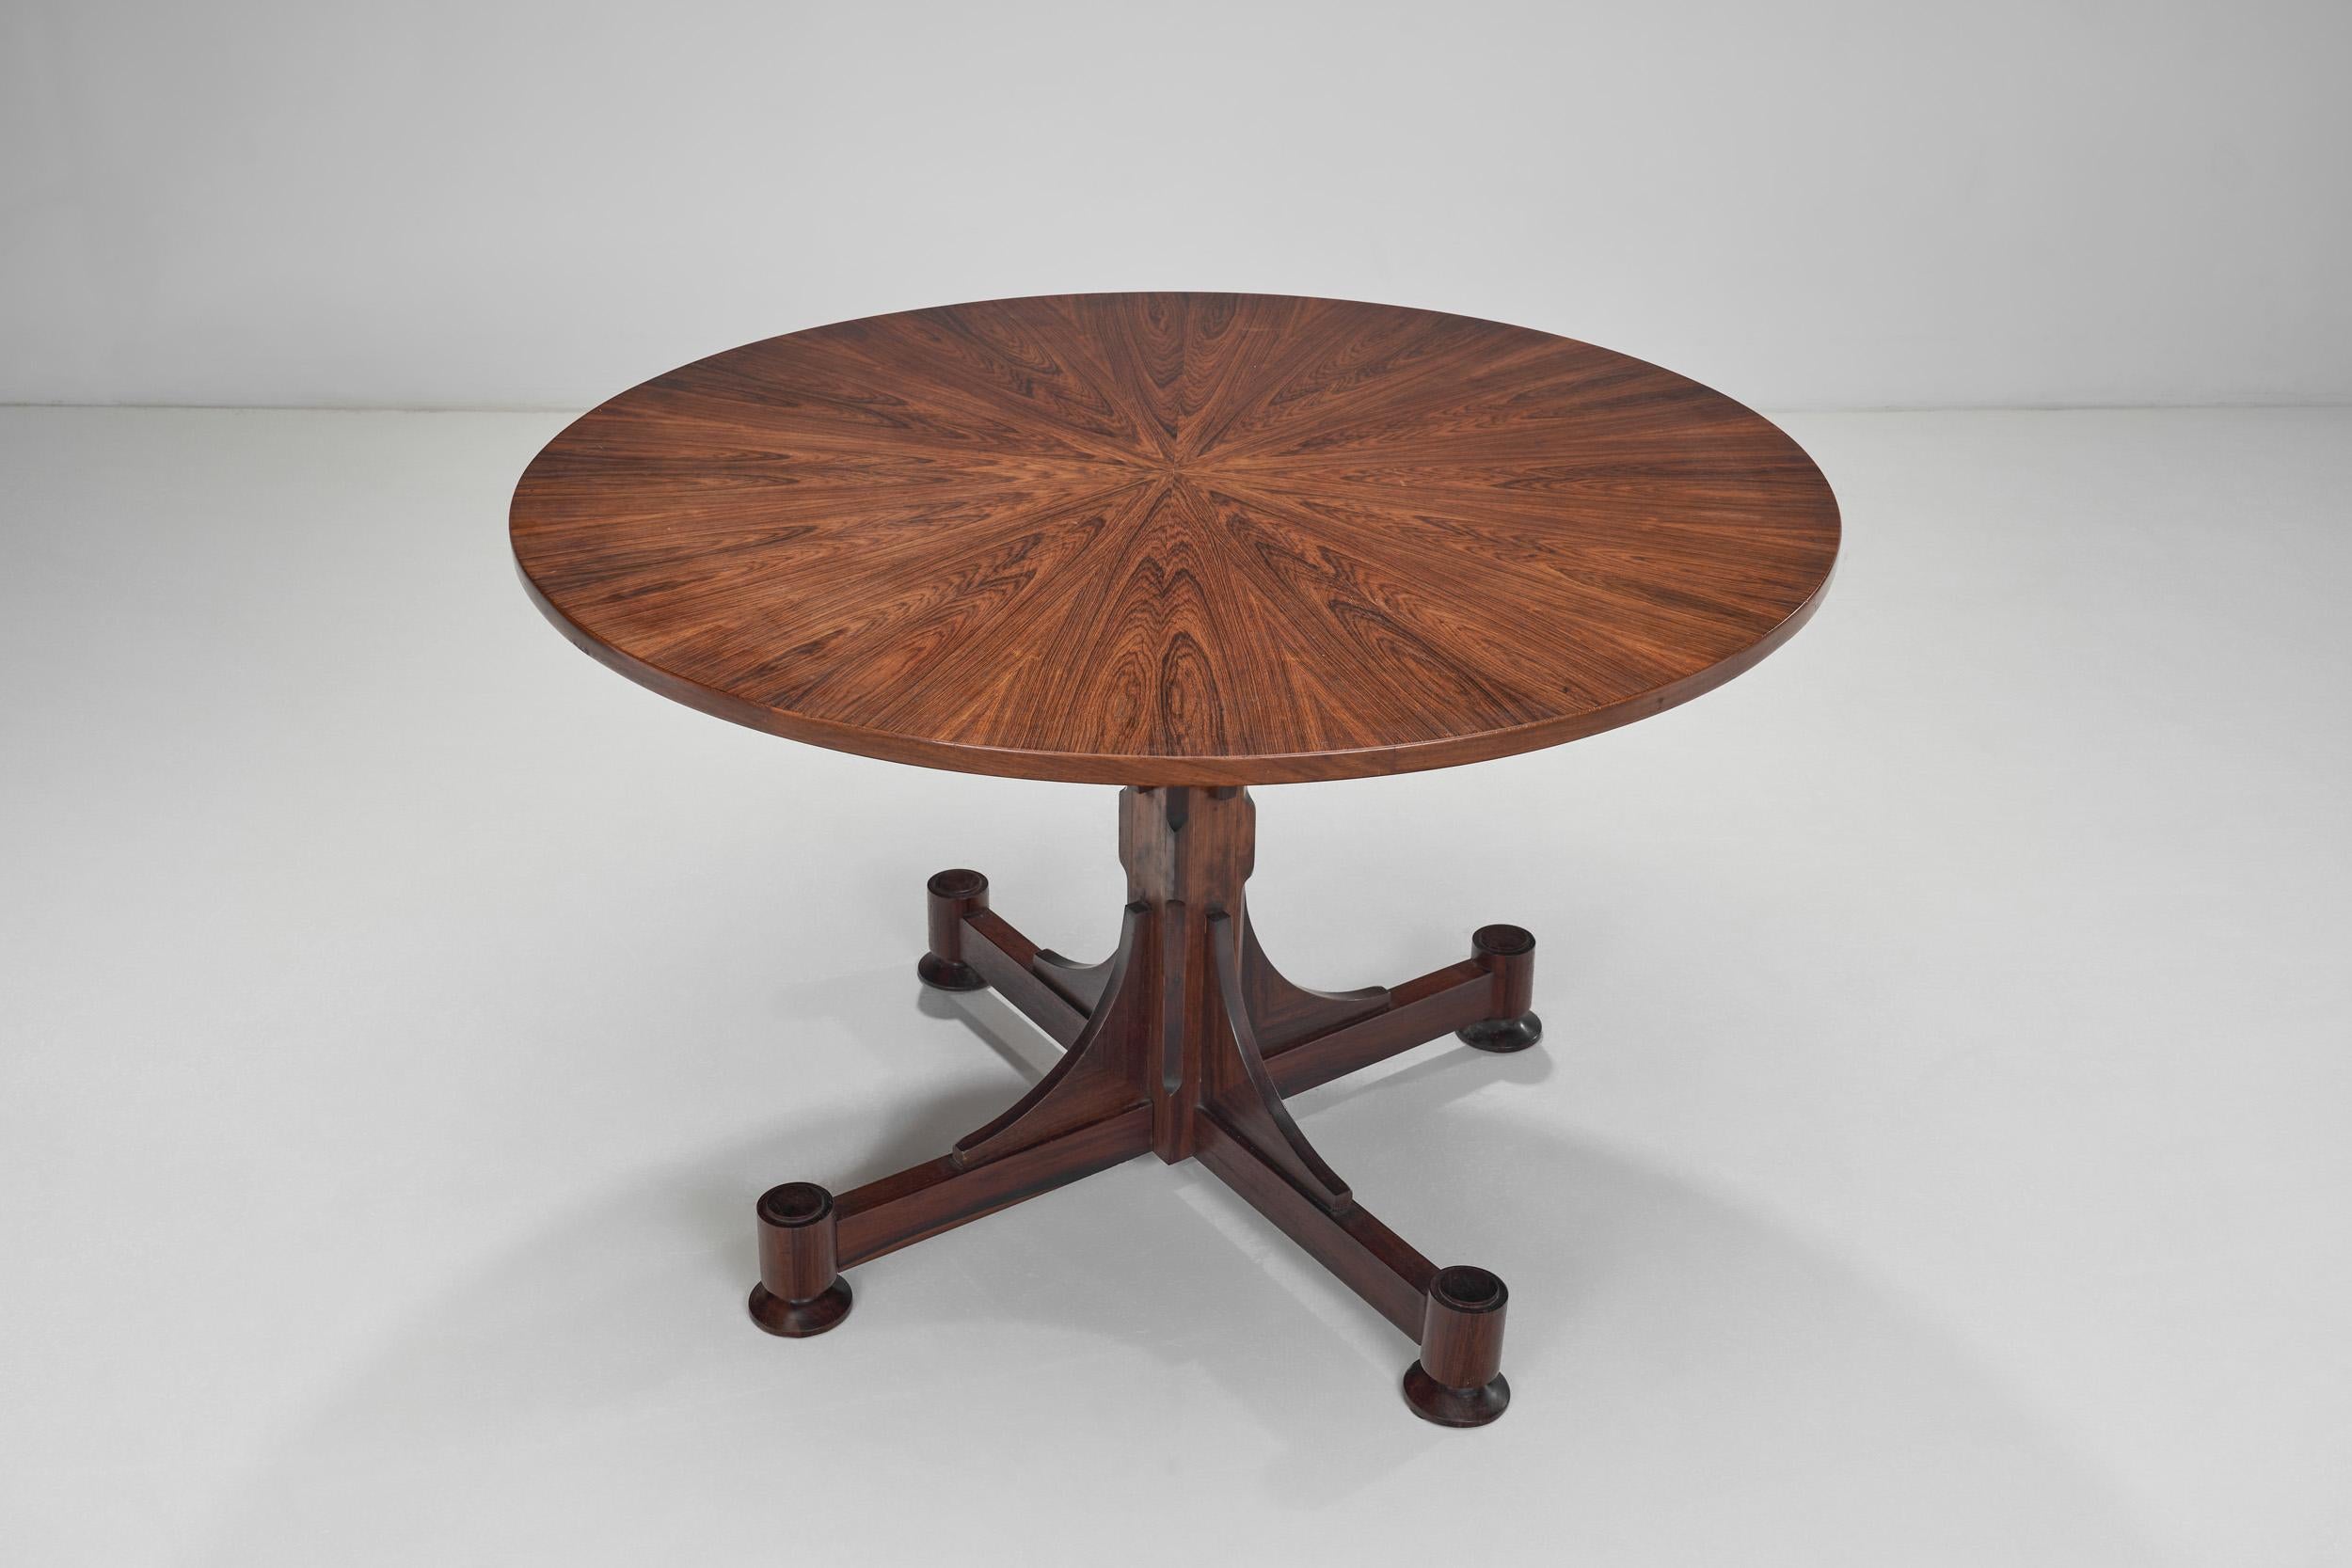 Mid-20th Century Sunburst Top Dining Table by Gianni Moscatelli for ARREDOFORM, Italy ca 1965 For Sale